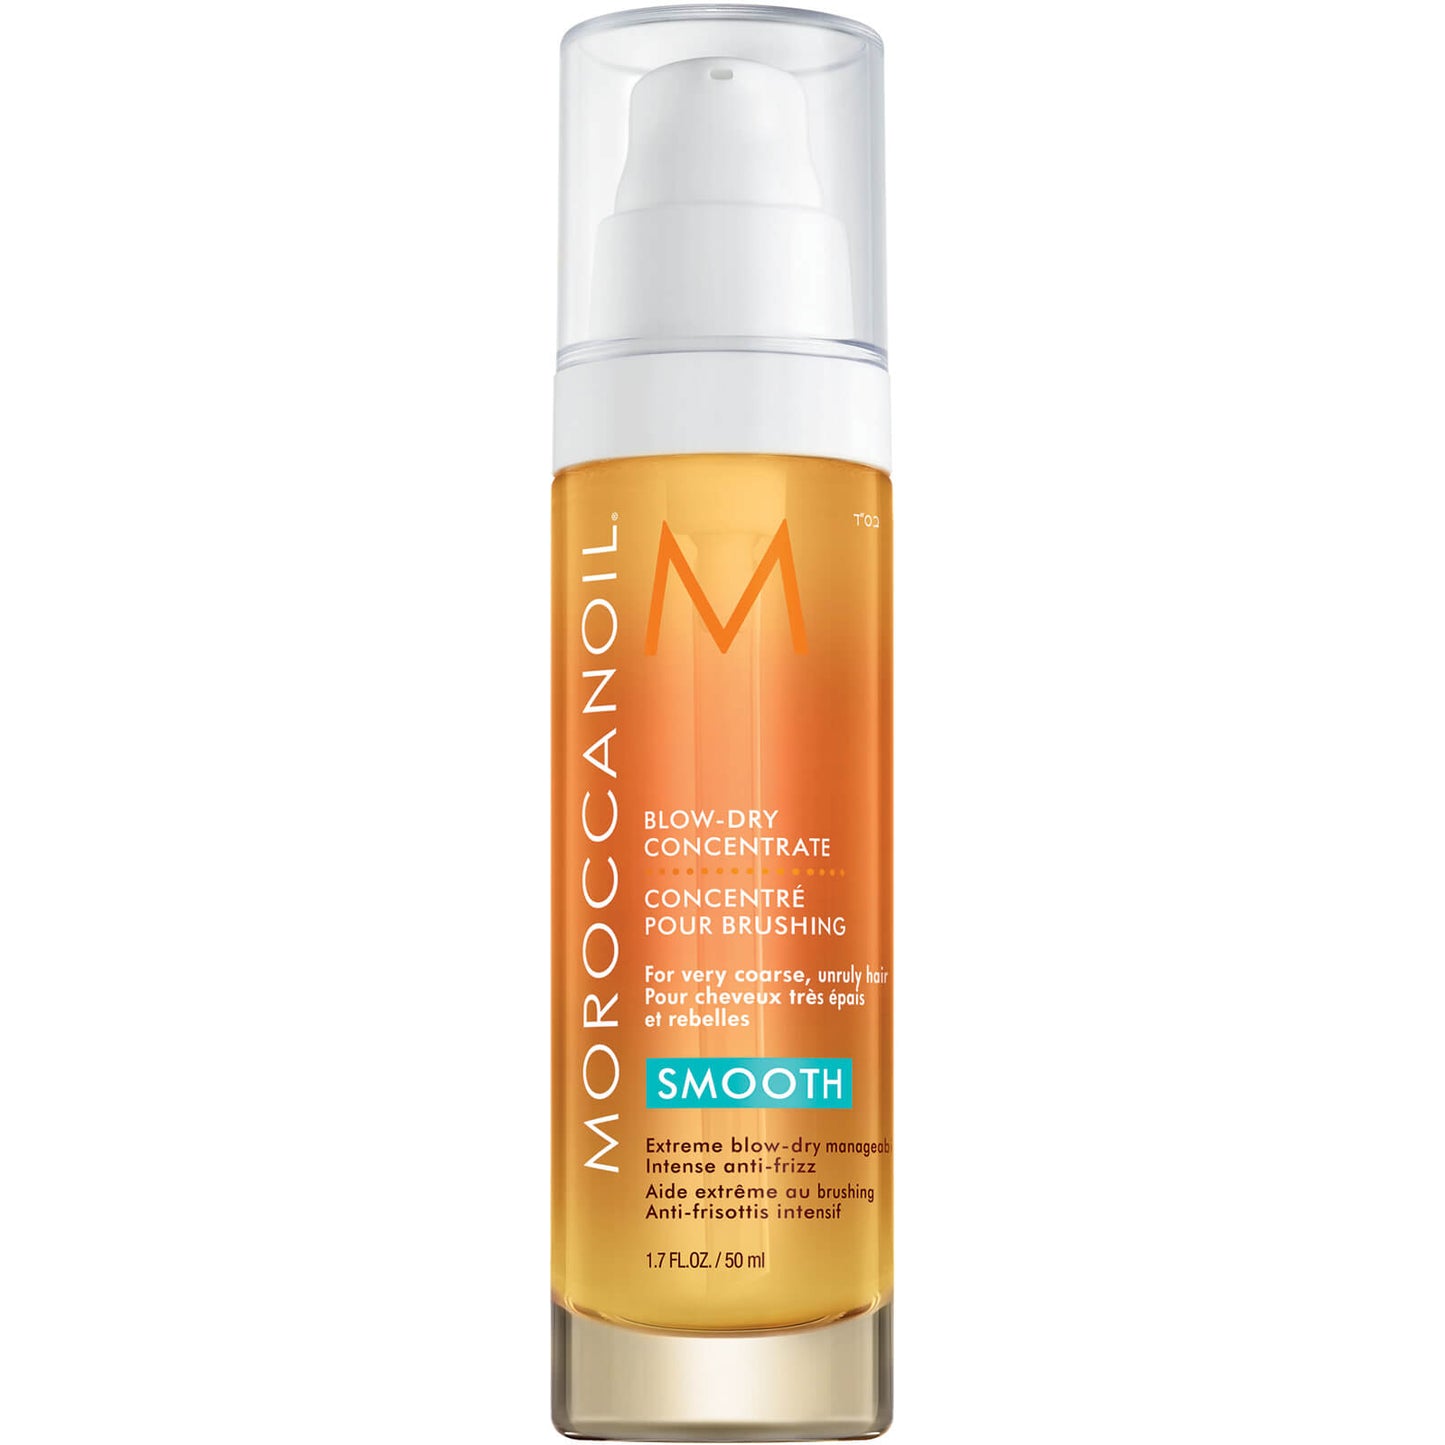 Moroccan oil Blow-Dry Concentrate